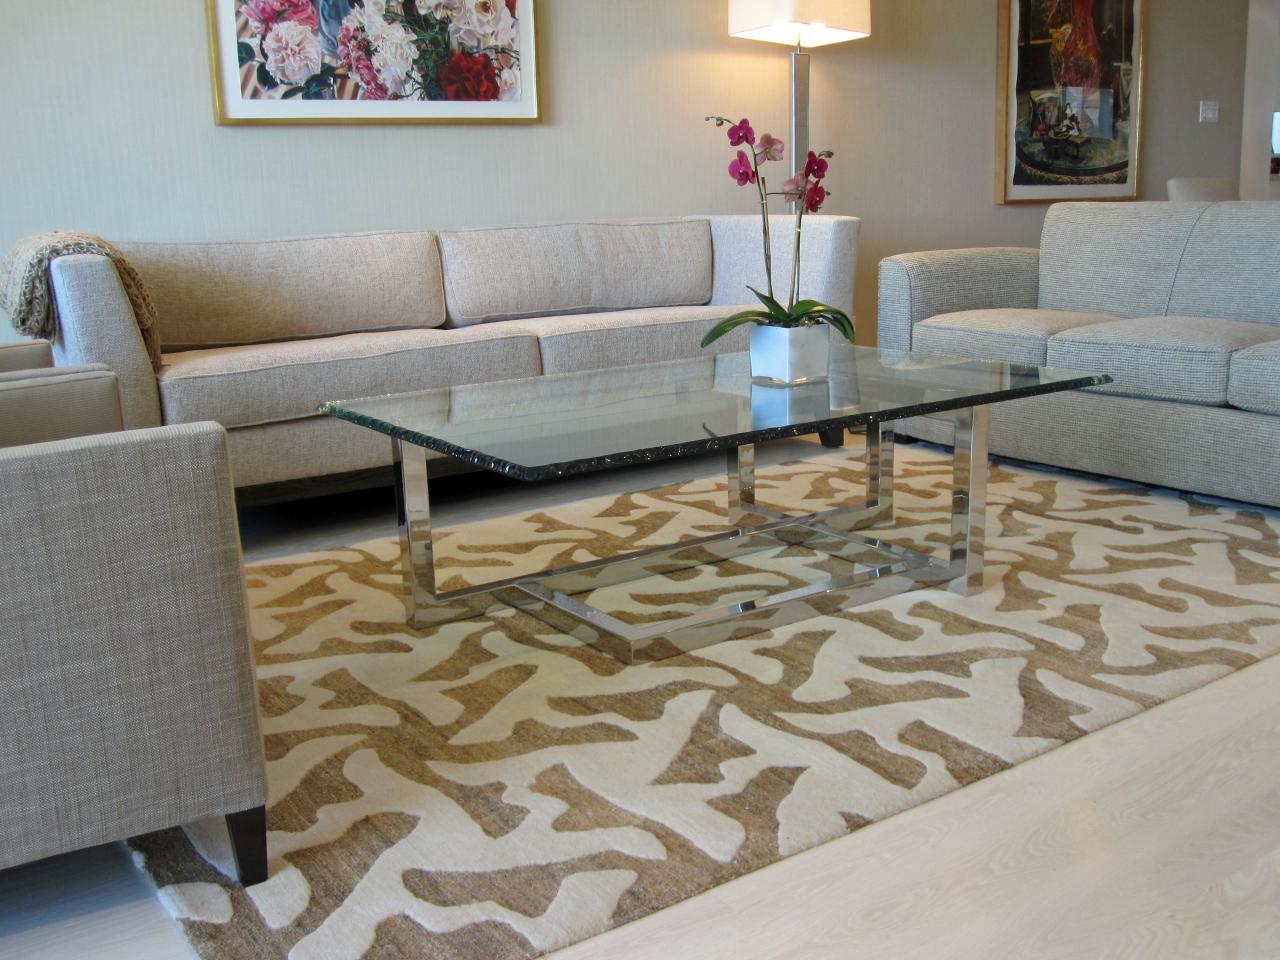 How To Choose Your Living Room Rug, How To Pick A Rug For Living Room